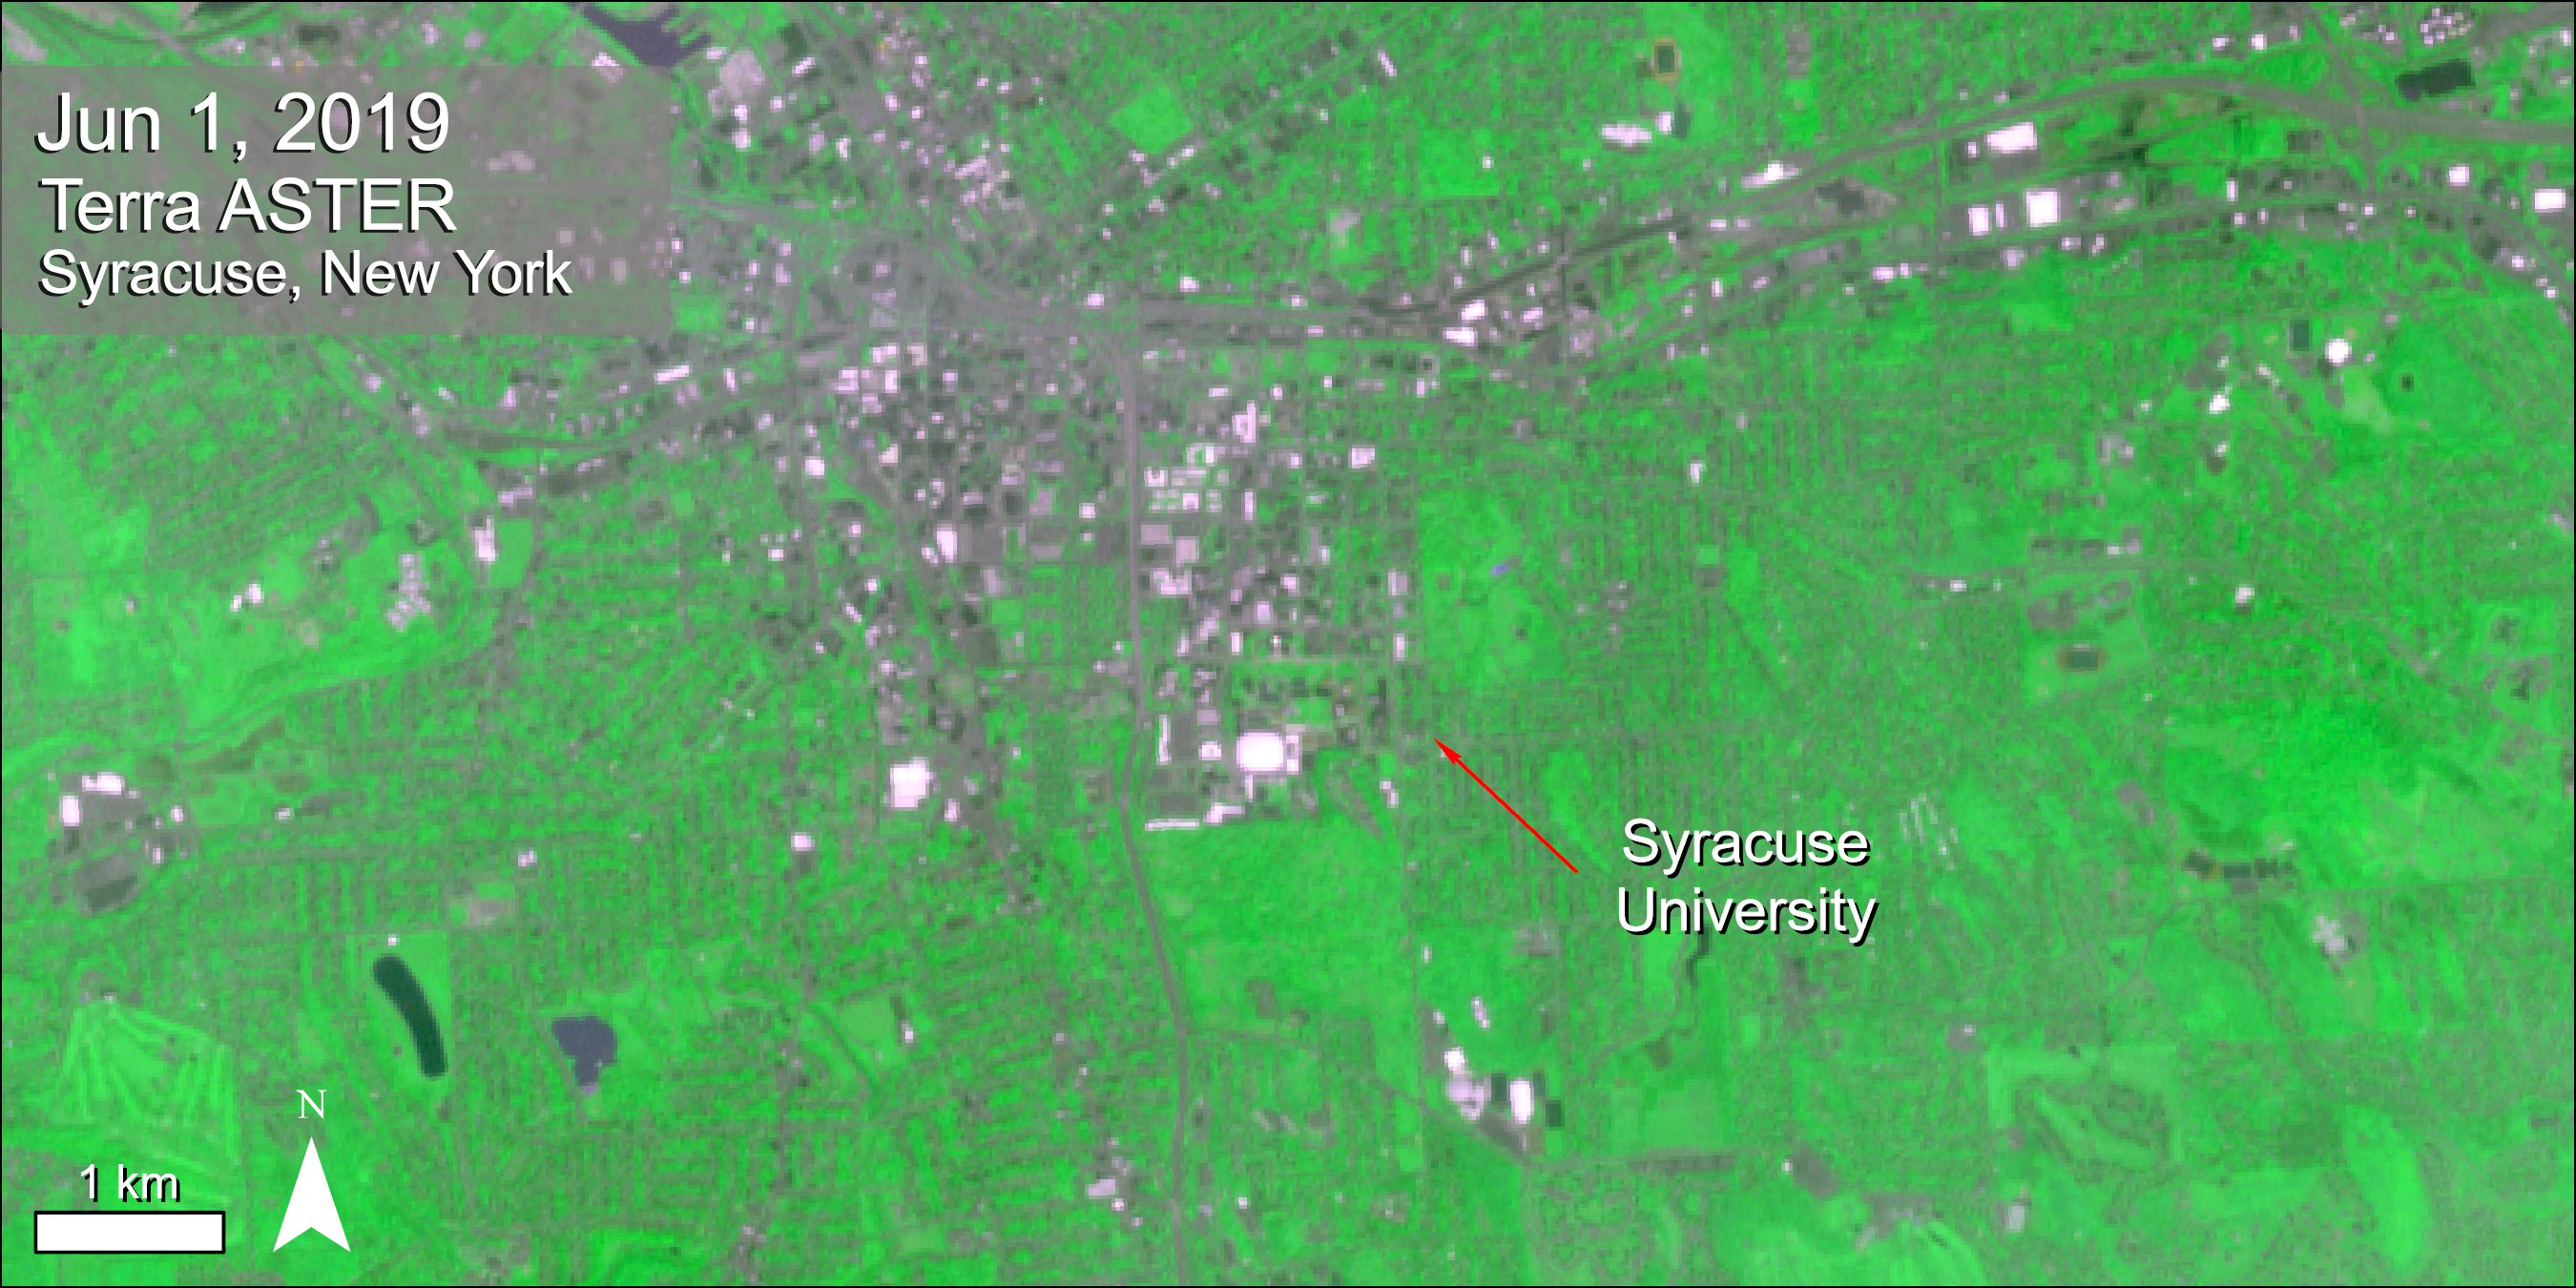 Terra ASTER imagery over Syracuse, New York.